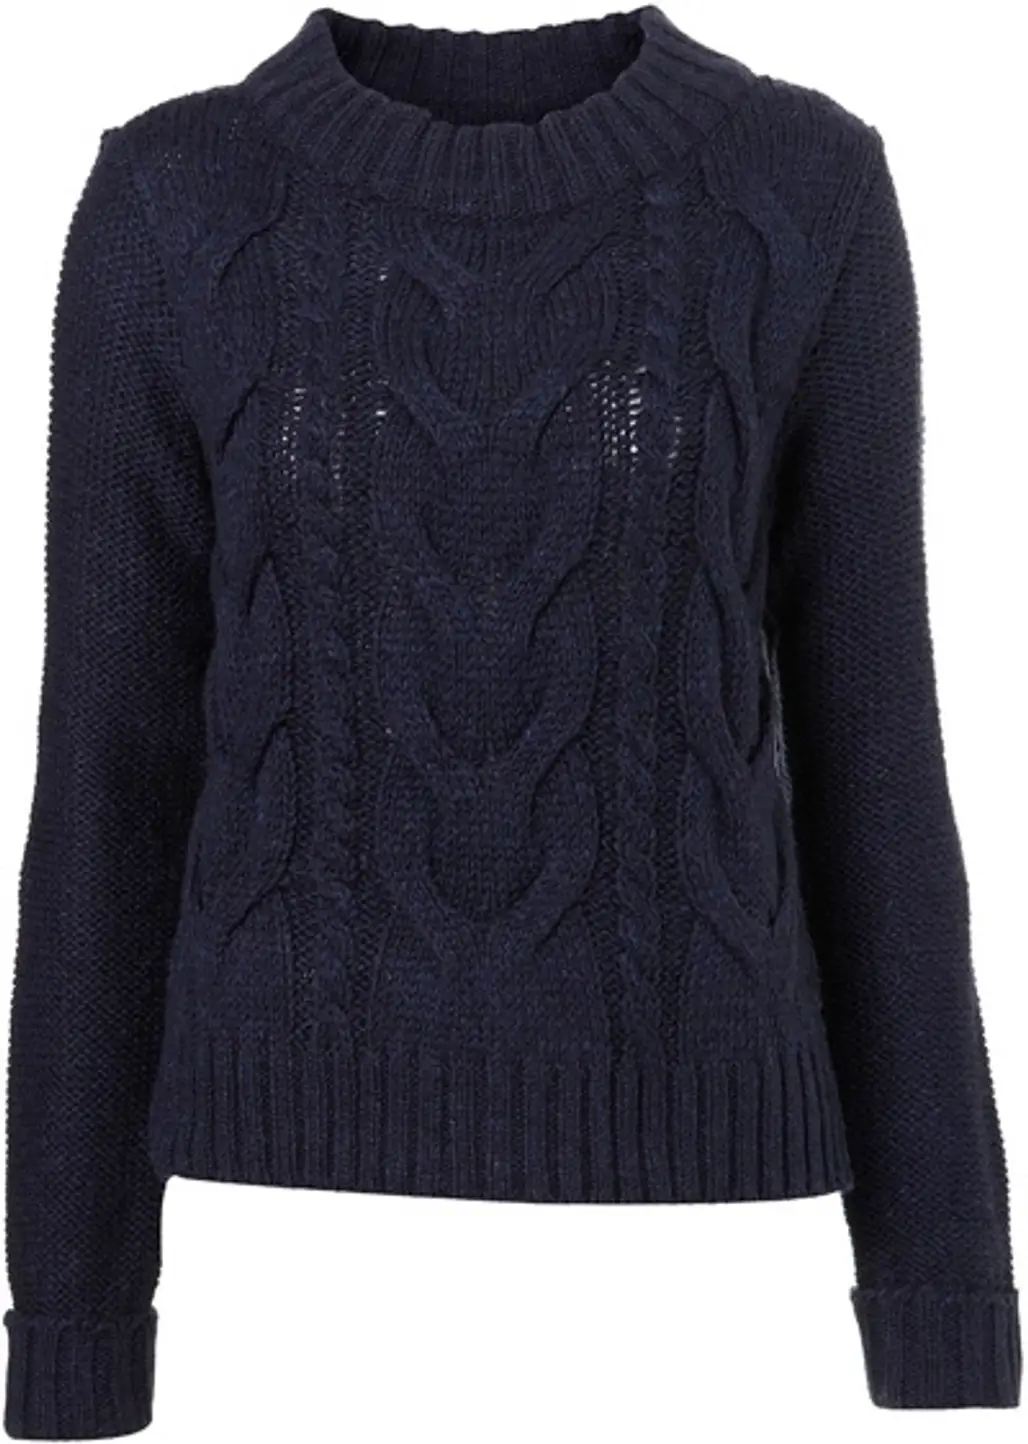 Topshop Knitted Aran Cable Crop Jumper